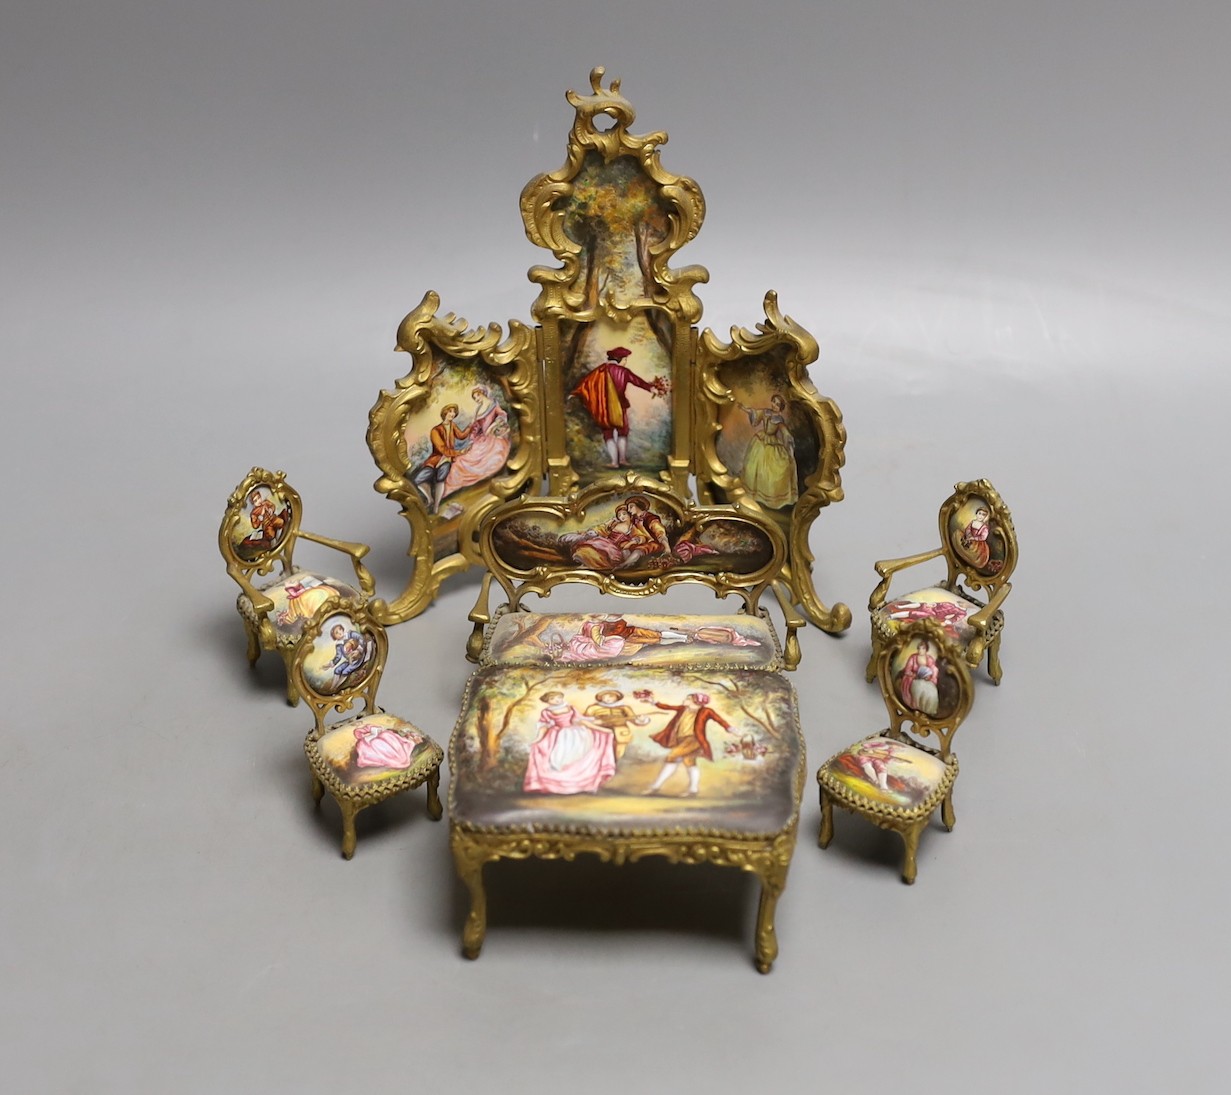 A suite of Viennese enamelled miniature furniture: 3 fold screen, table, salon sofa, a pair of